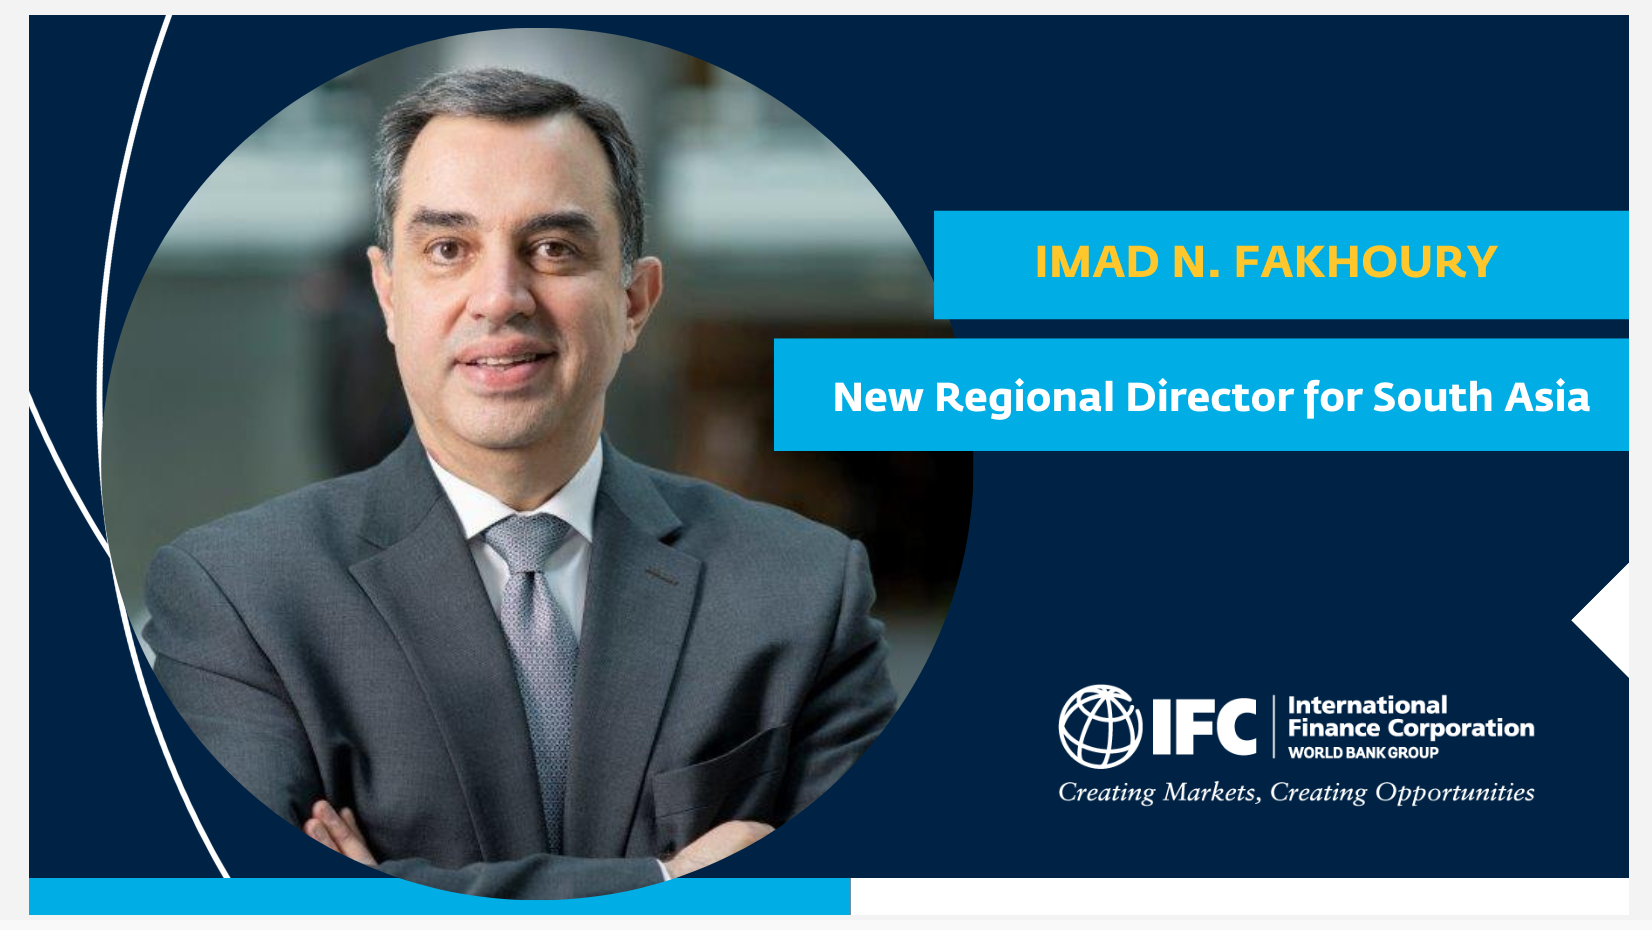 IFC Appoints Imad N. Fakhoury as Regional Director for South Asia